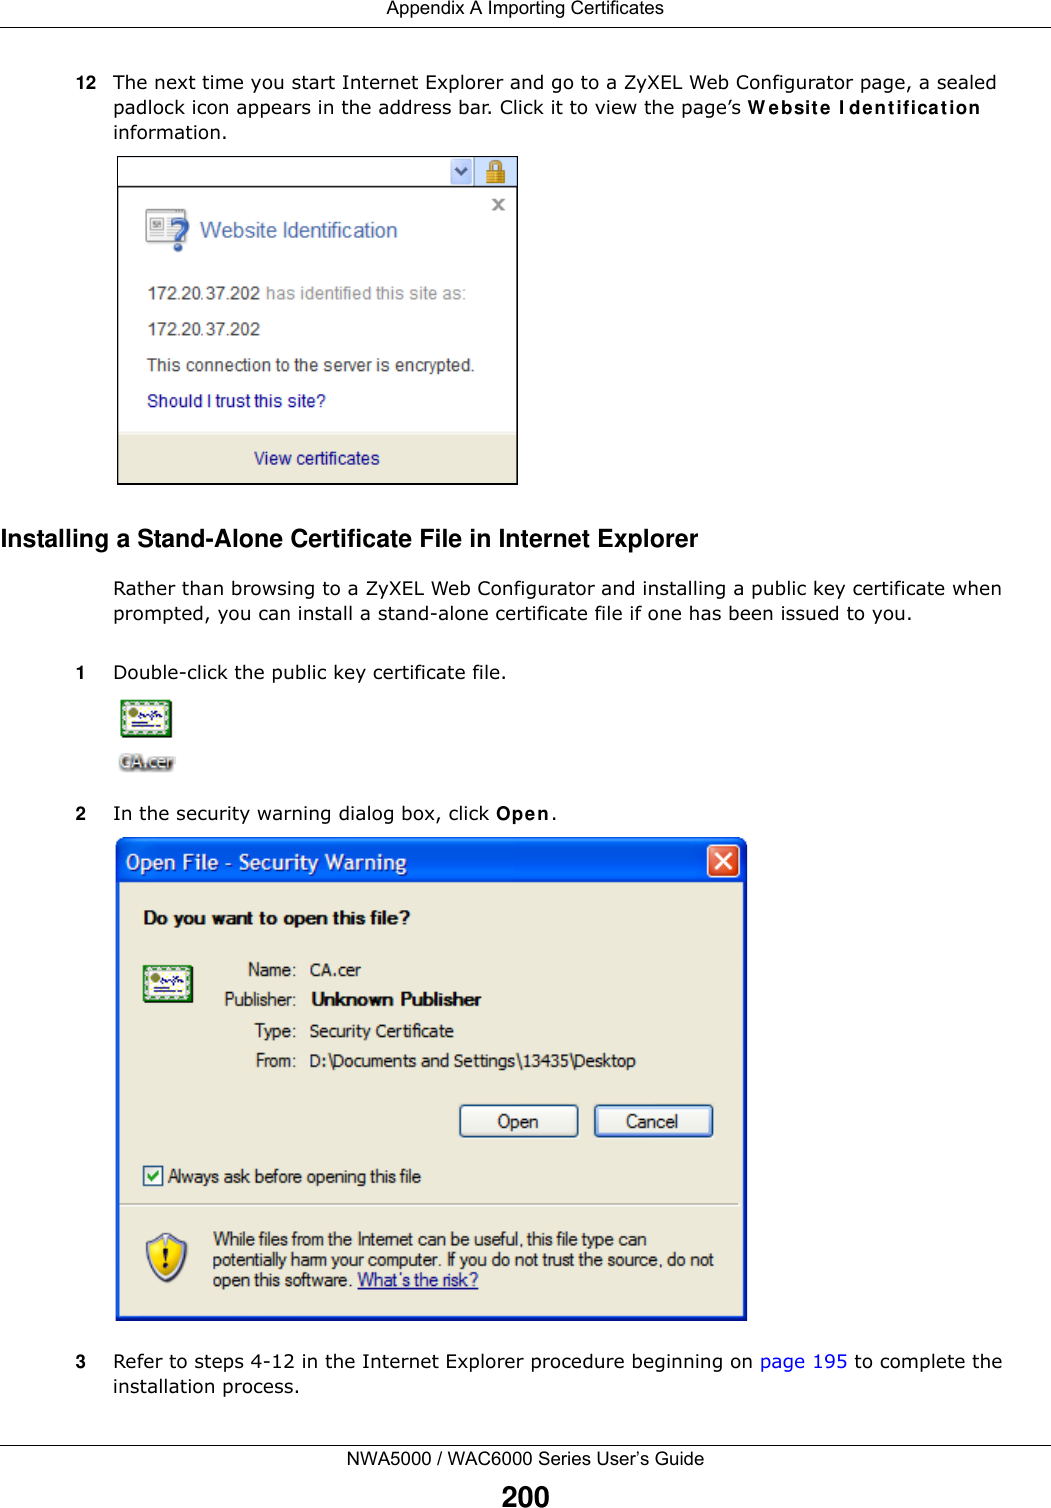 Appendix A Importing CertificatesNWA5000 / WAC6000 Series User’s Guide20012 The next time you start Internet Explorer and go to a ZyXEL Web Configurator page, a sealed padlock icon appears in the address bar. Click it to view the page’s W ebsite  I dent ificat ion  information.Installing a Stand-Alone Certificate File in Internet ExplorerRather than browsing to a ZyXEL Web Configurator and installing a public key certificate when prompted, you can install a stand-alone certificate file if one has been issued to you.1Double-click the public key certificate file.2In the security warning dialog box, click Open.3Refer to steps 4-12 in the Internet Explorer procedure beginning on page 195 to complete the installation process.